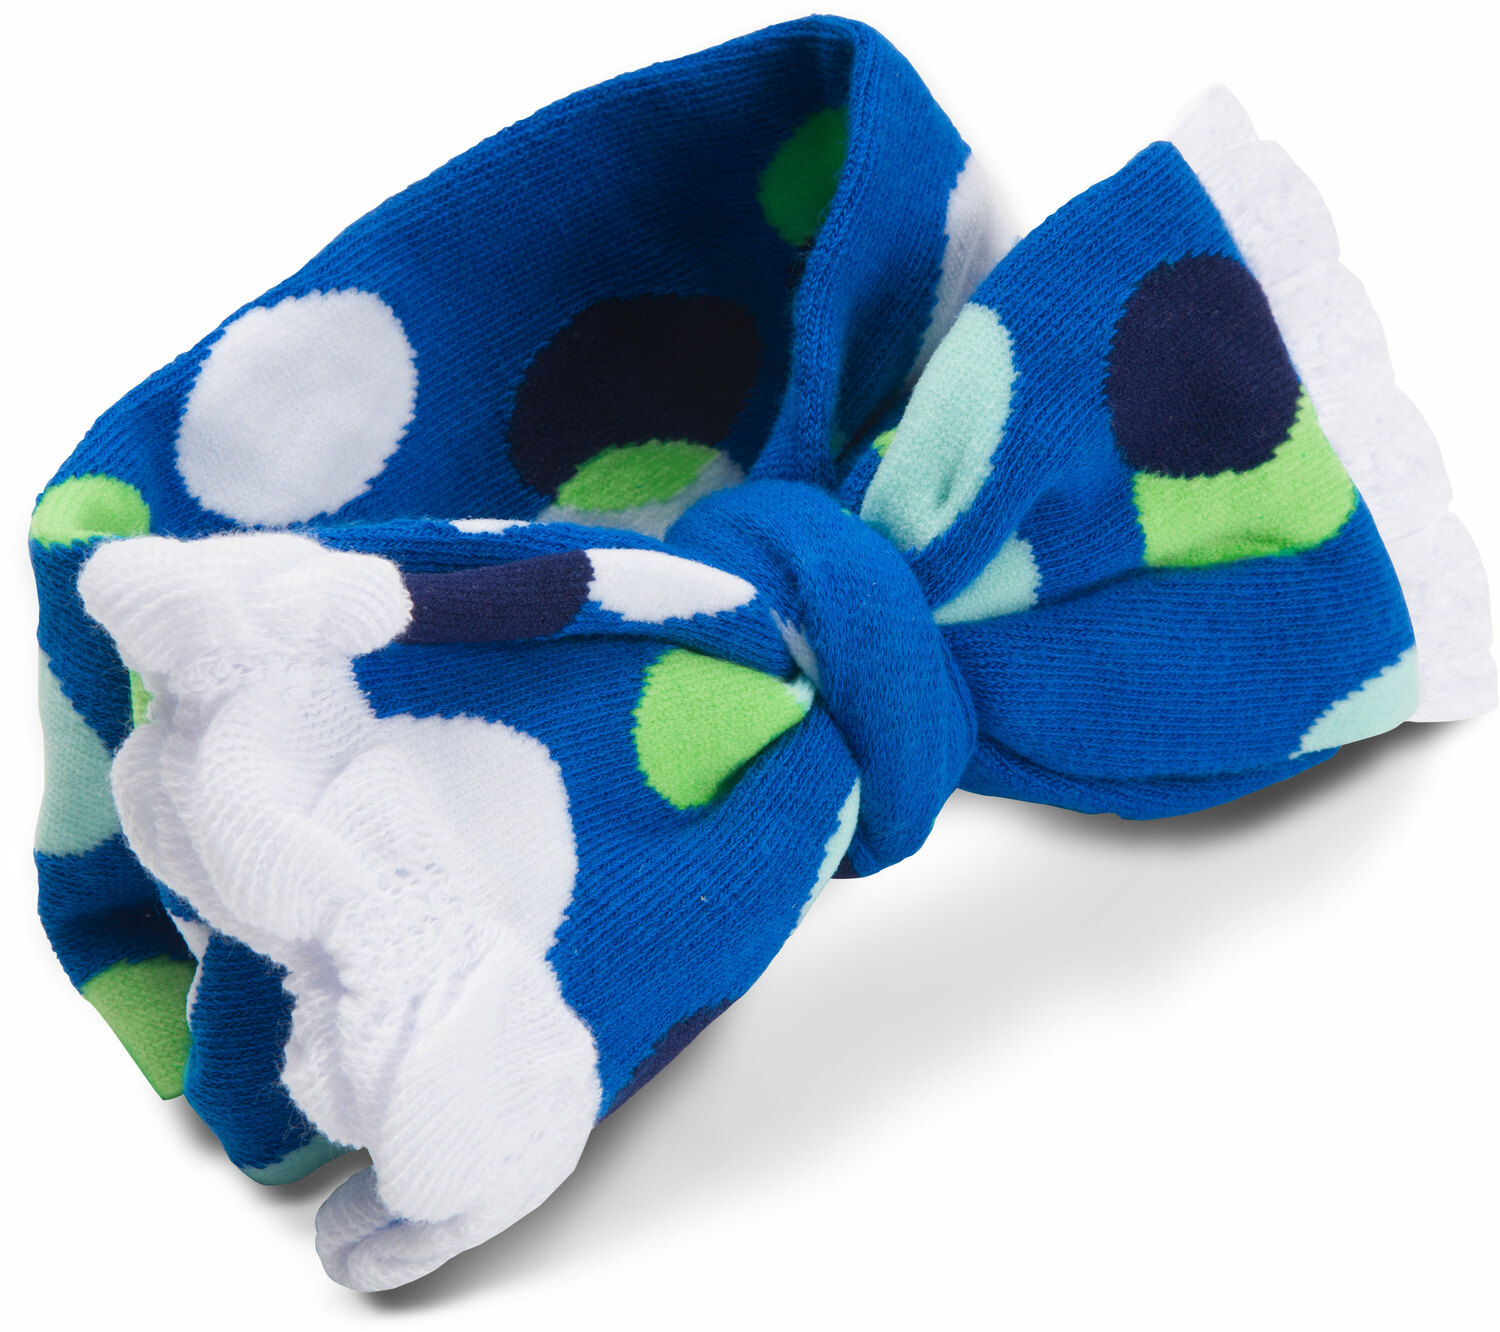 White and Navy Polka Dot by Izzy & Owie - White and Navy Polka Dot - Ruffled Knitted Headband